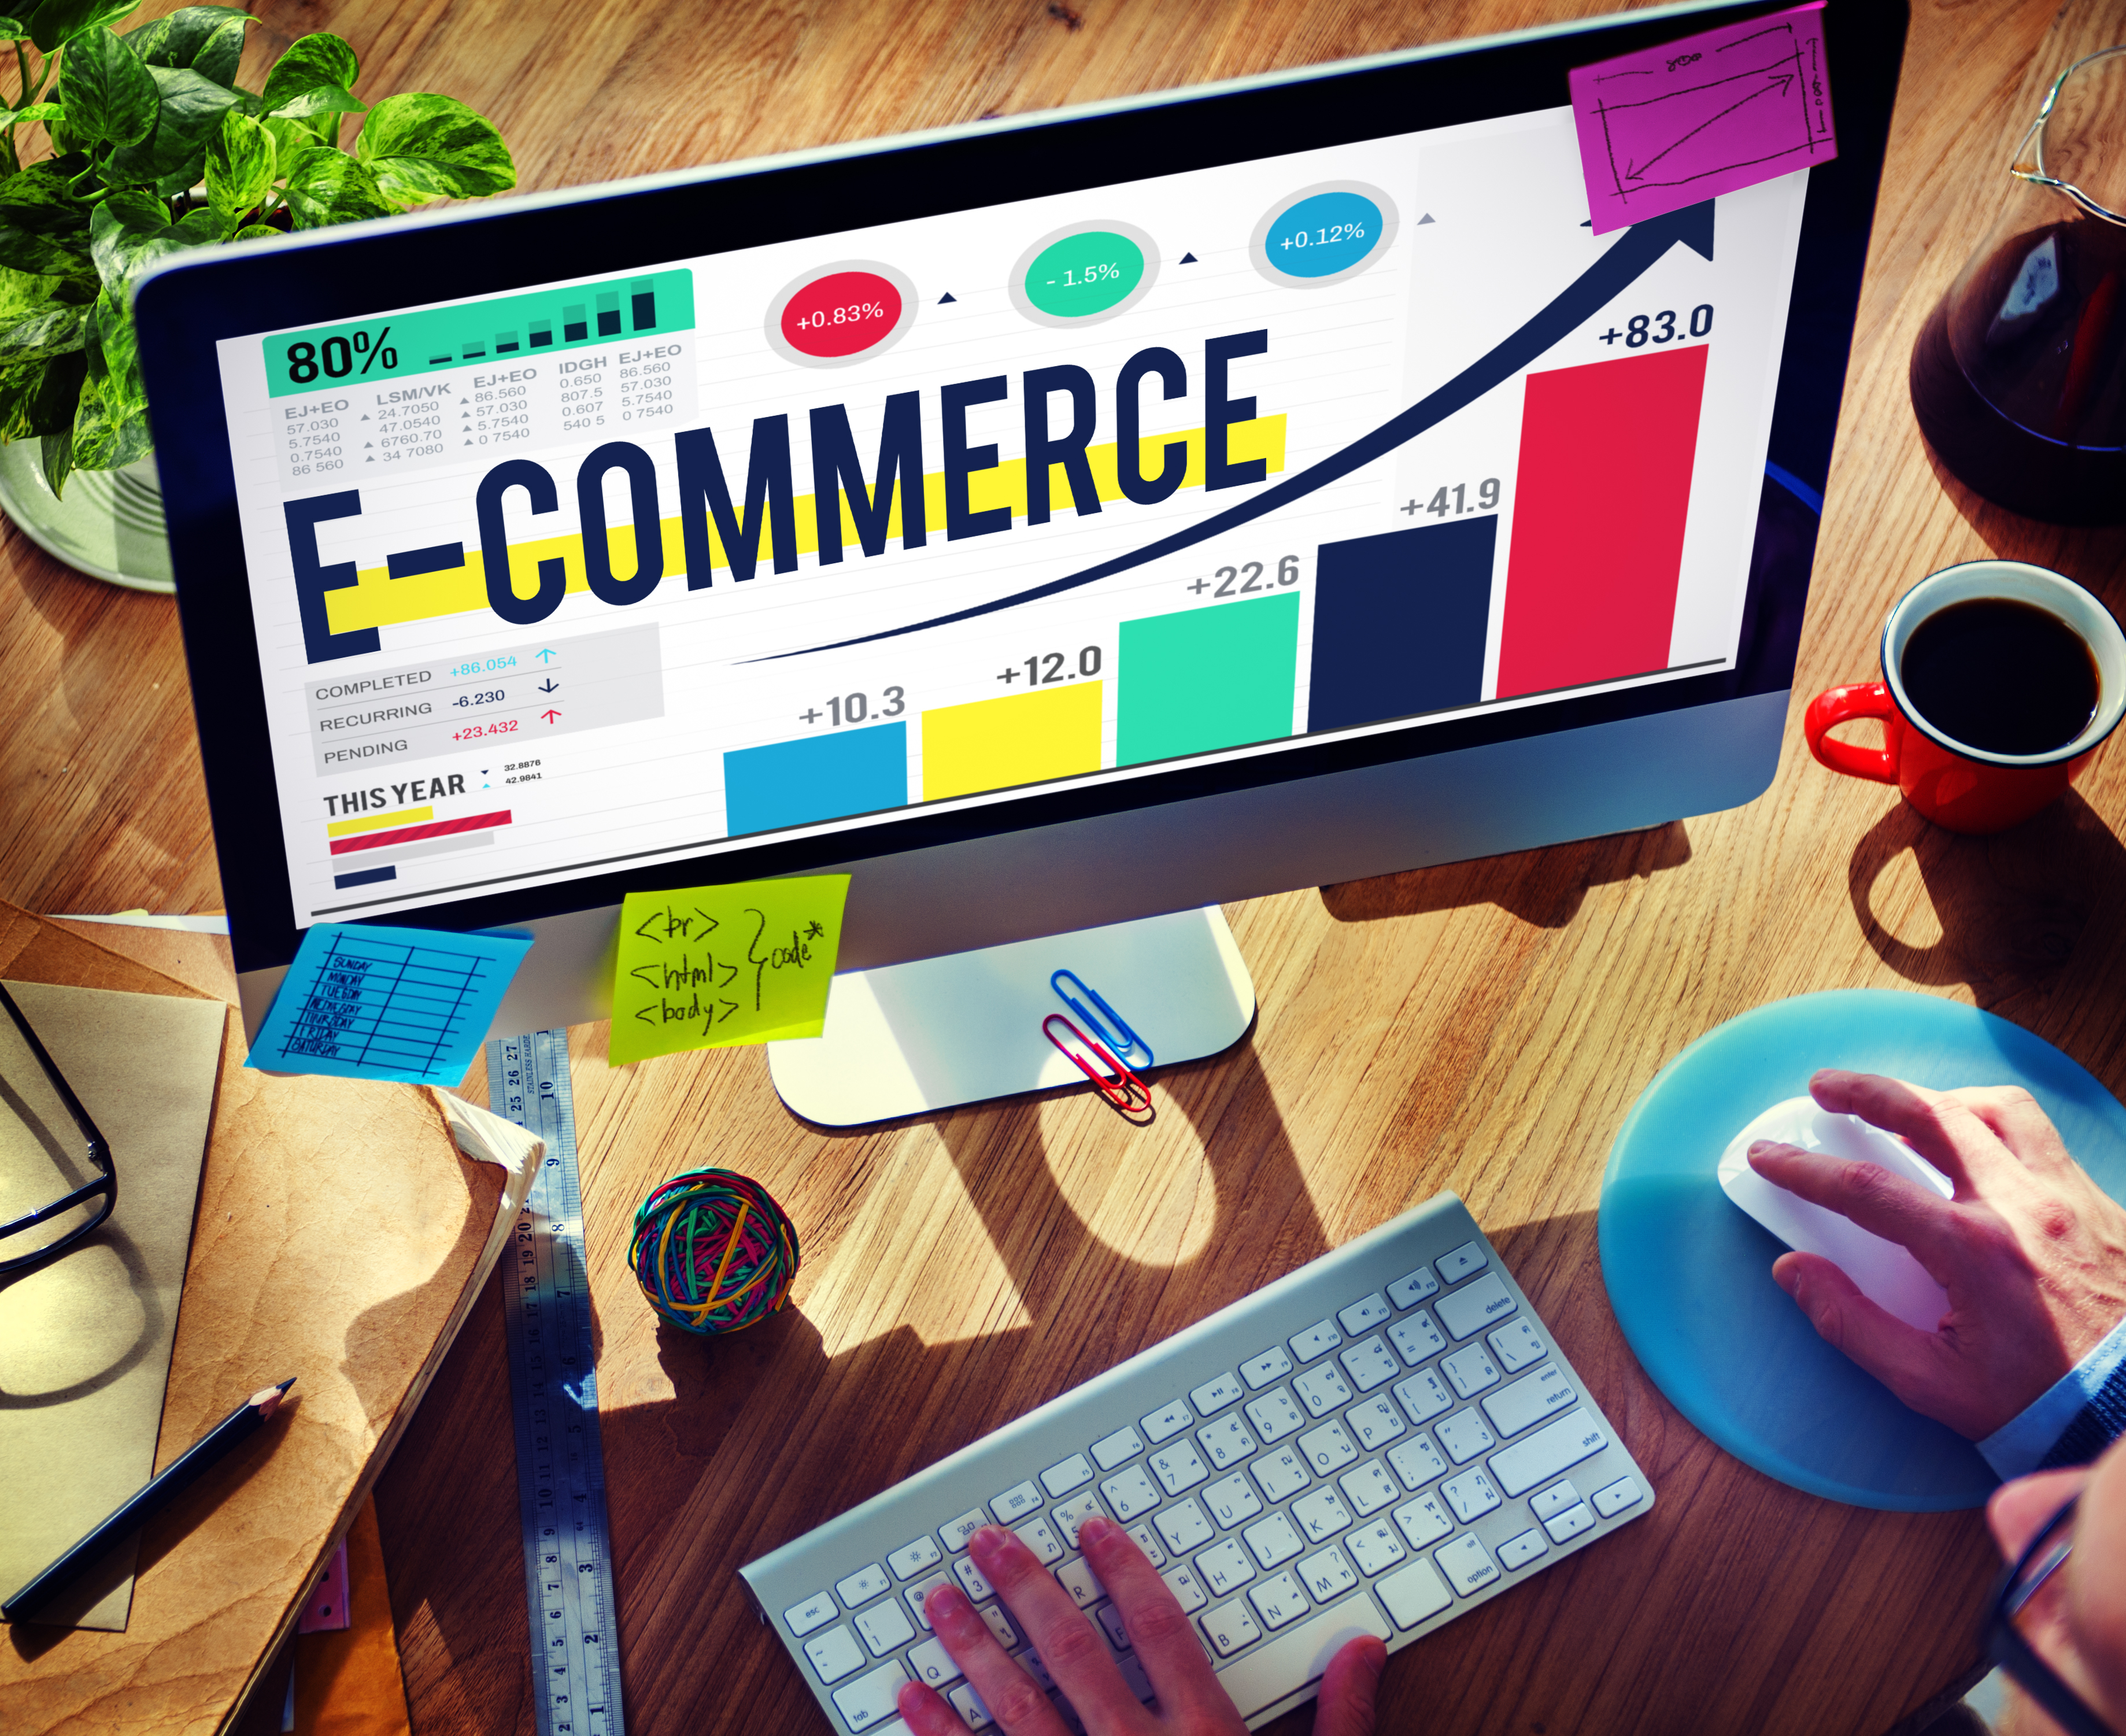 how to start an e-commerce business